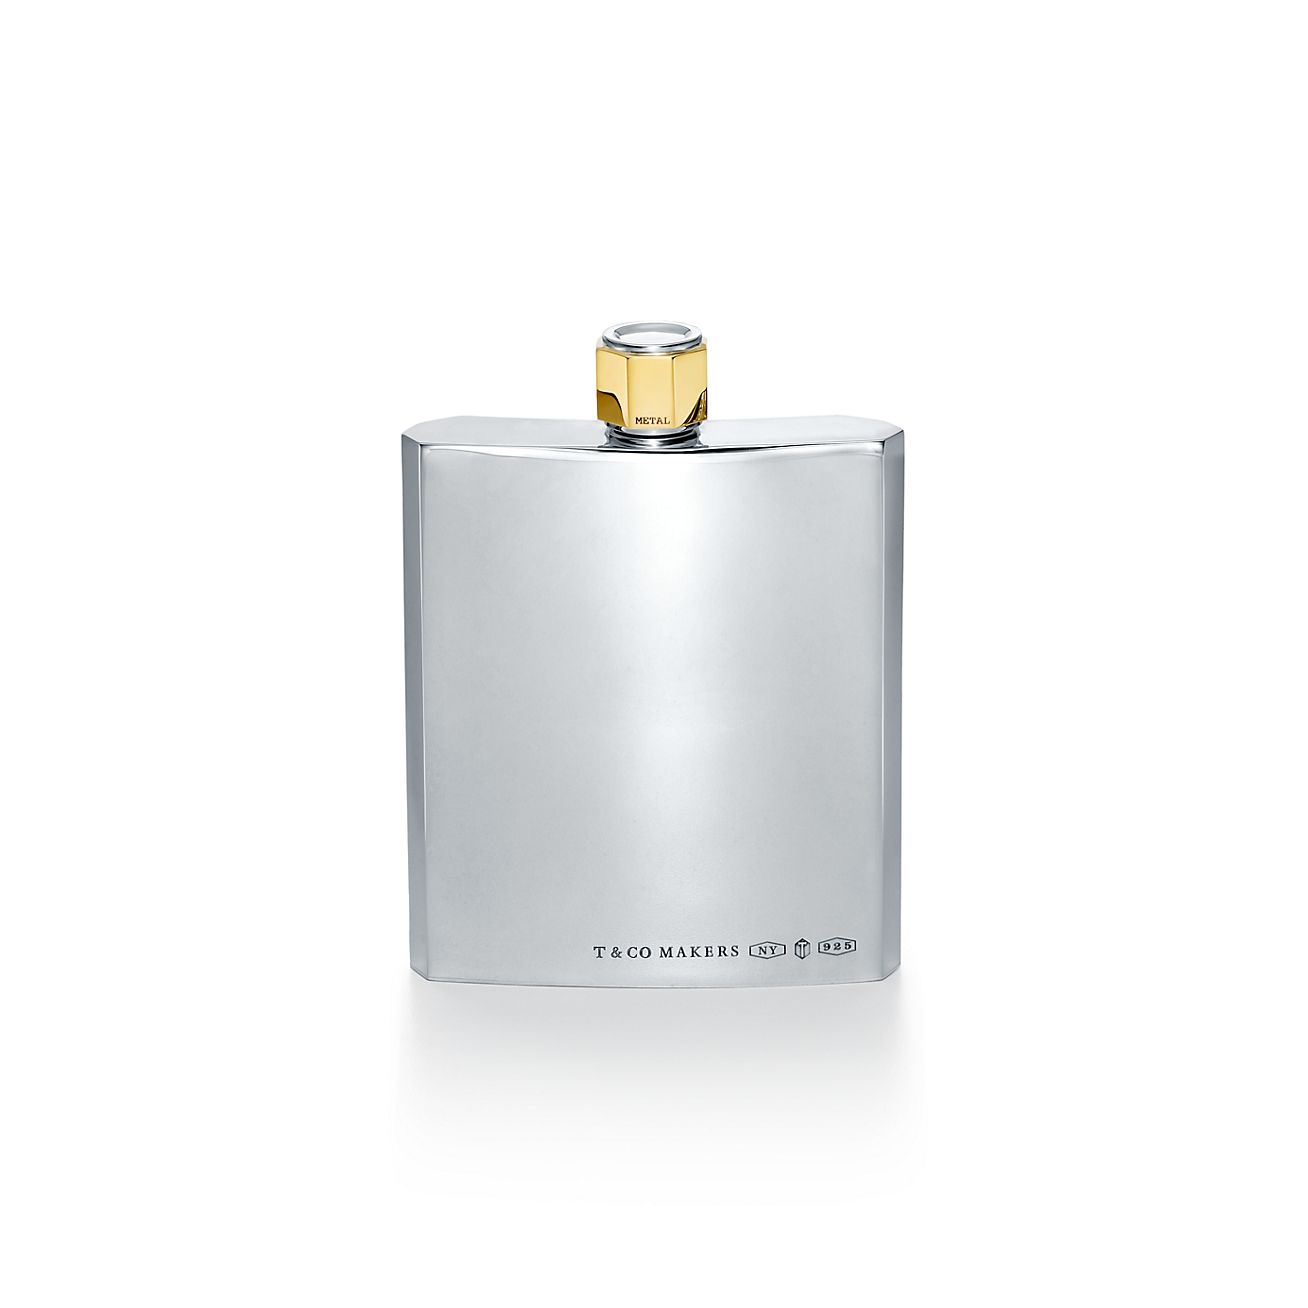 Tiffany 1837 Makers flask in sterling 